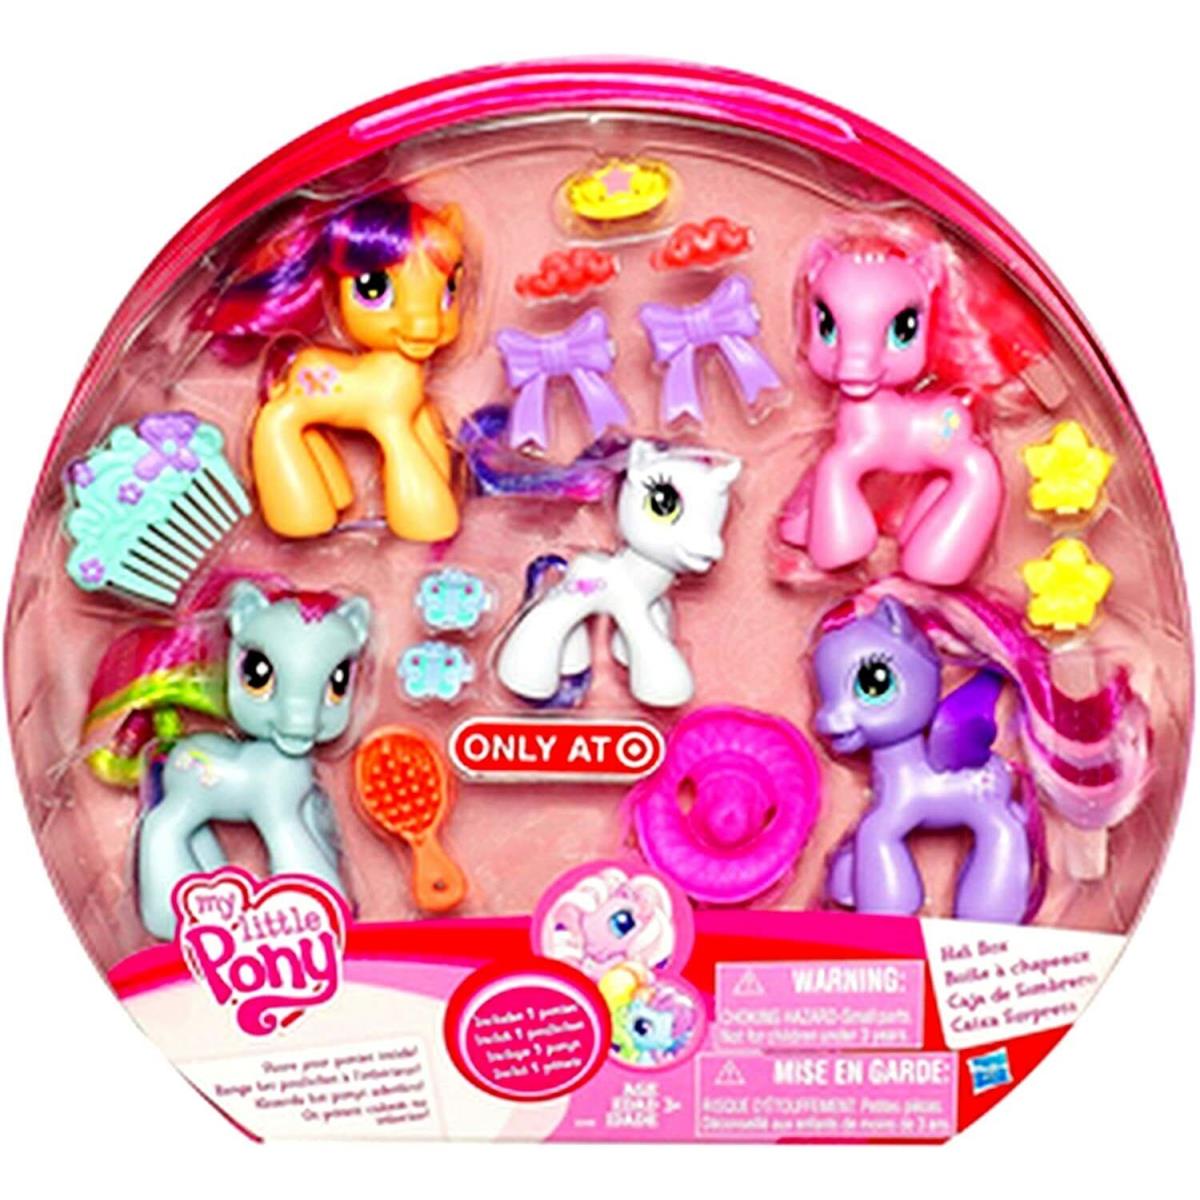 My Little Pony Hat Box with Figures Target Exclusive in Package